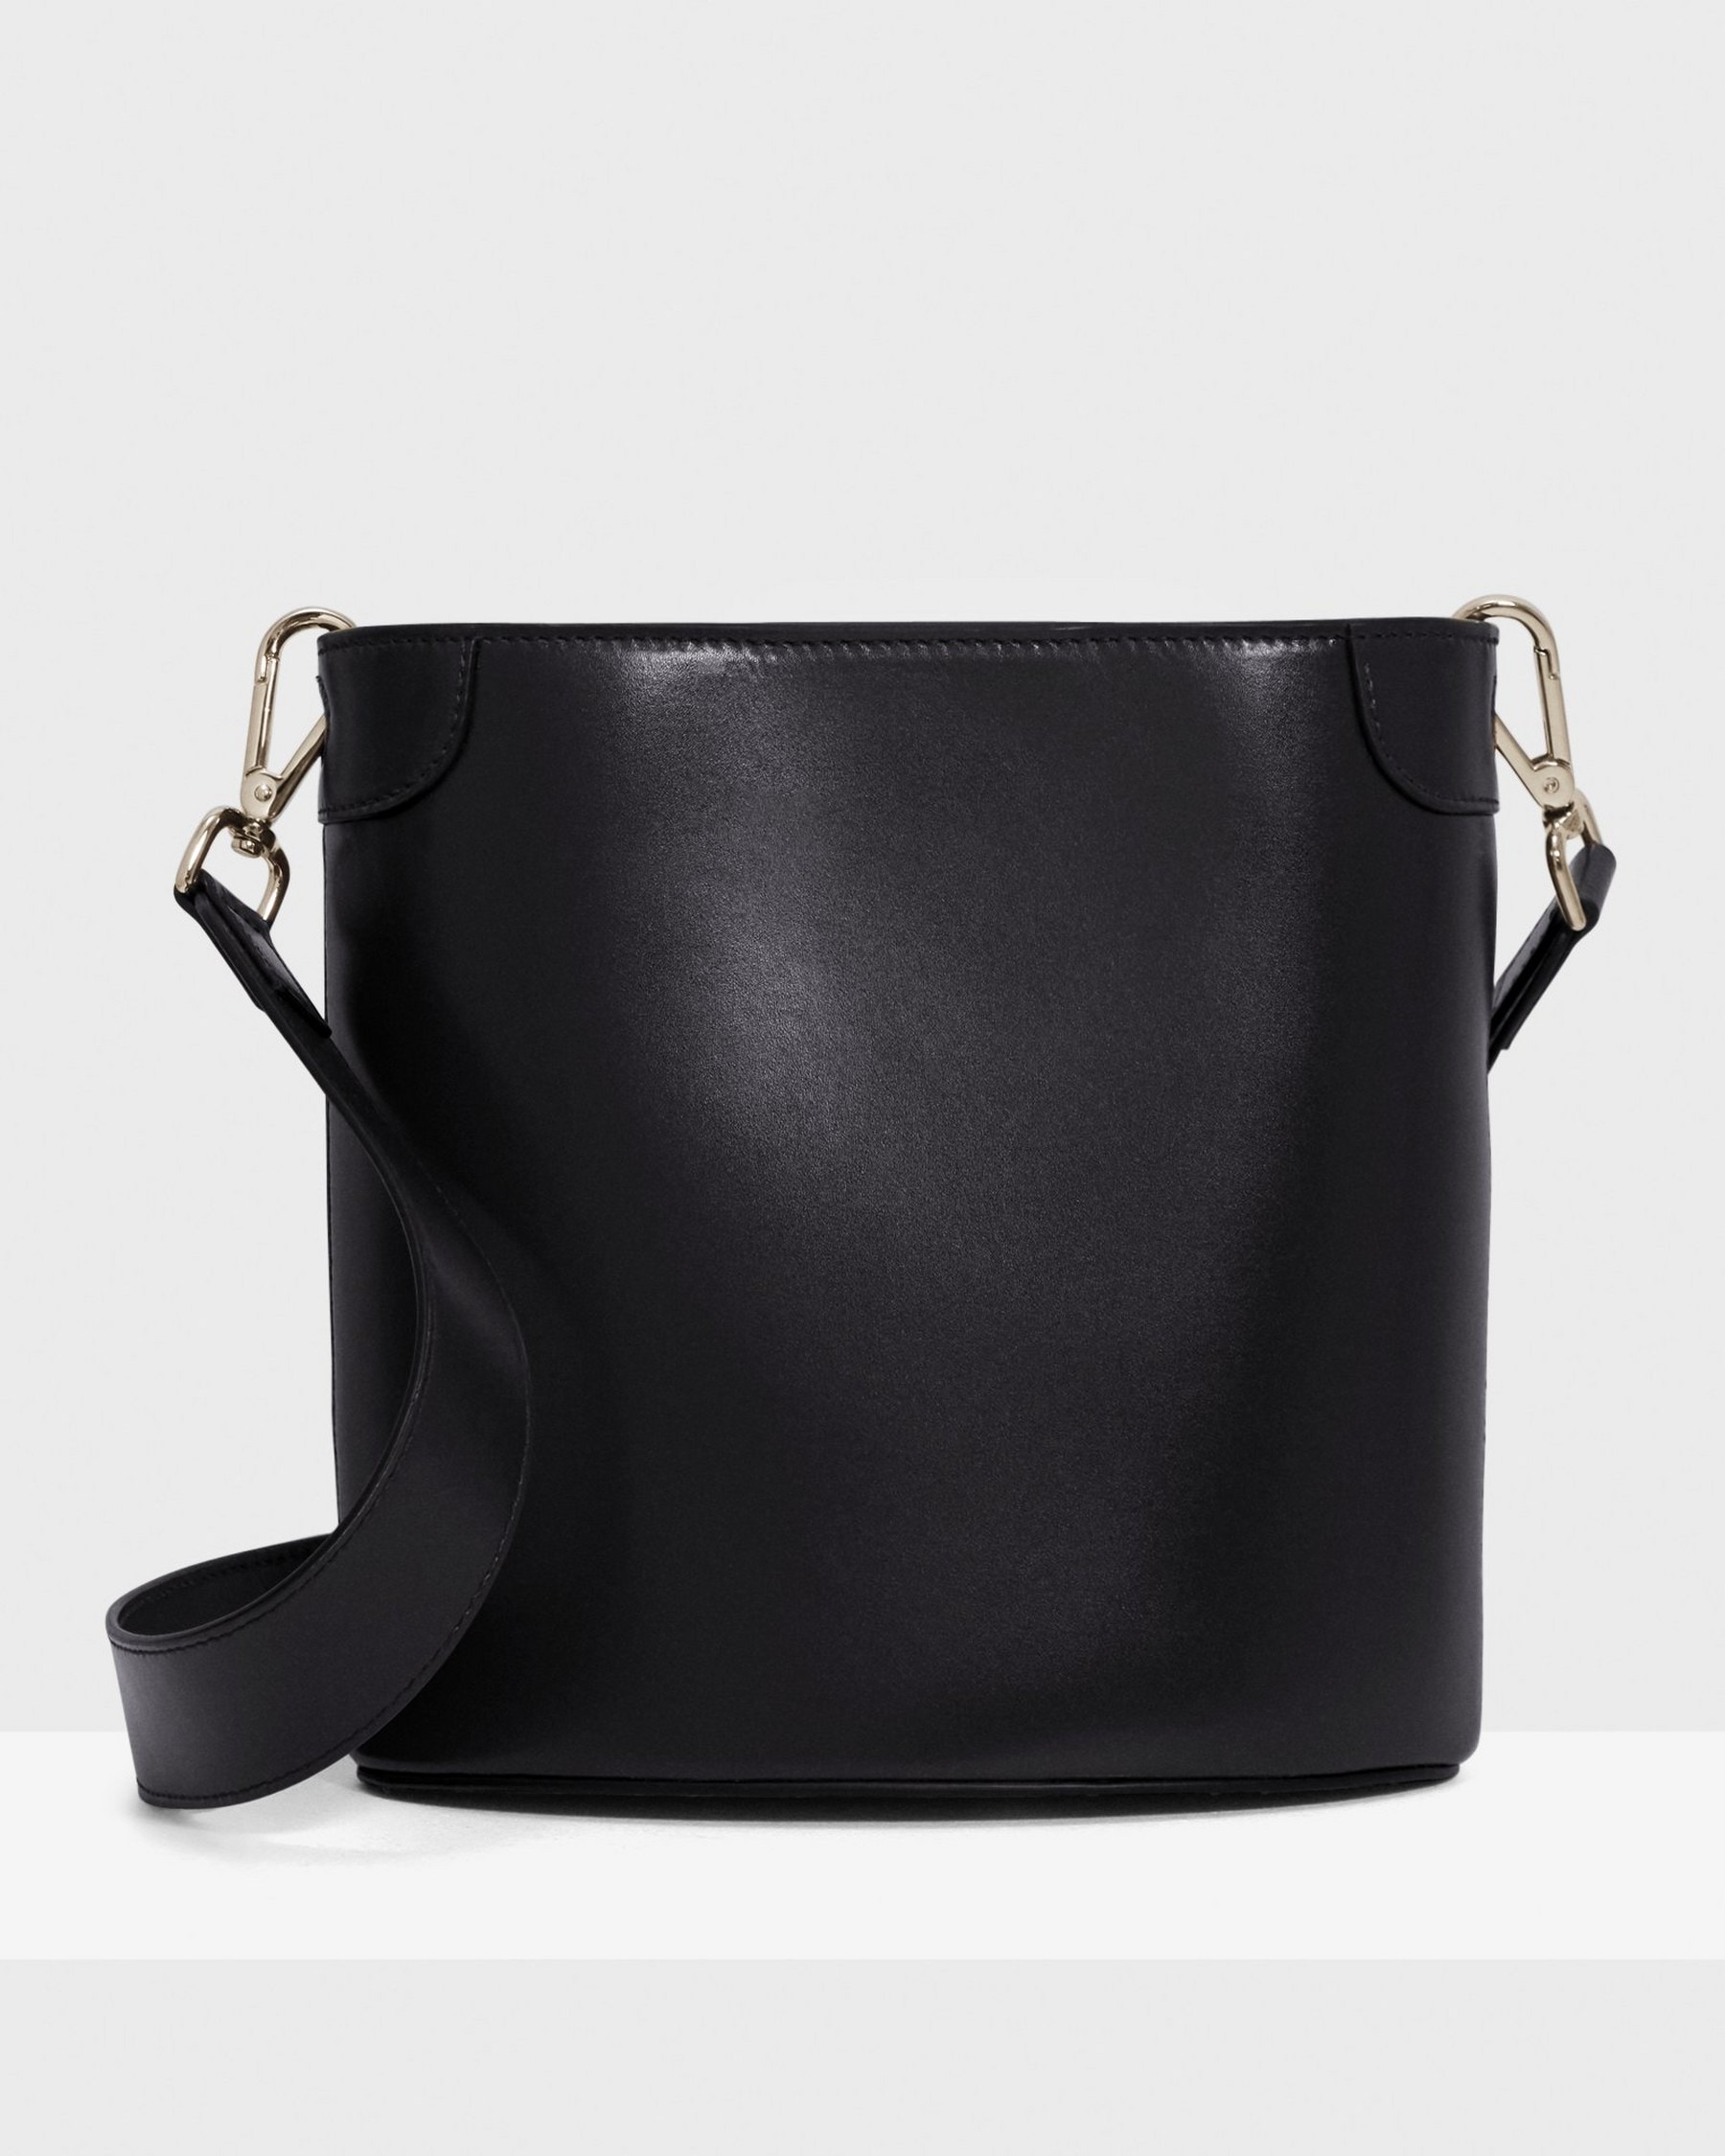 theory.com | Small Bucket Bag in Leather